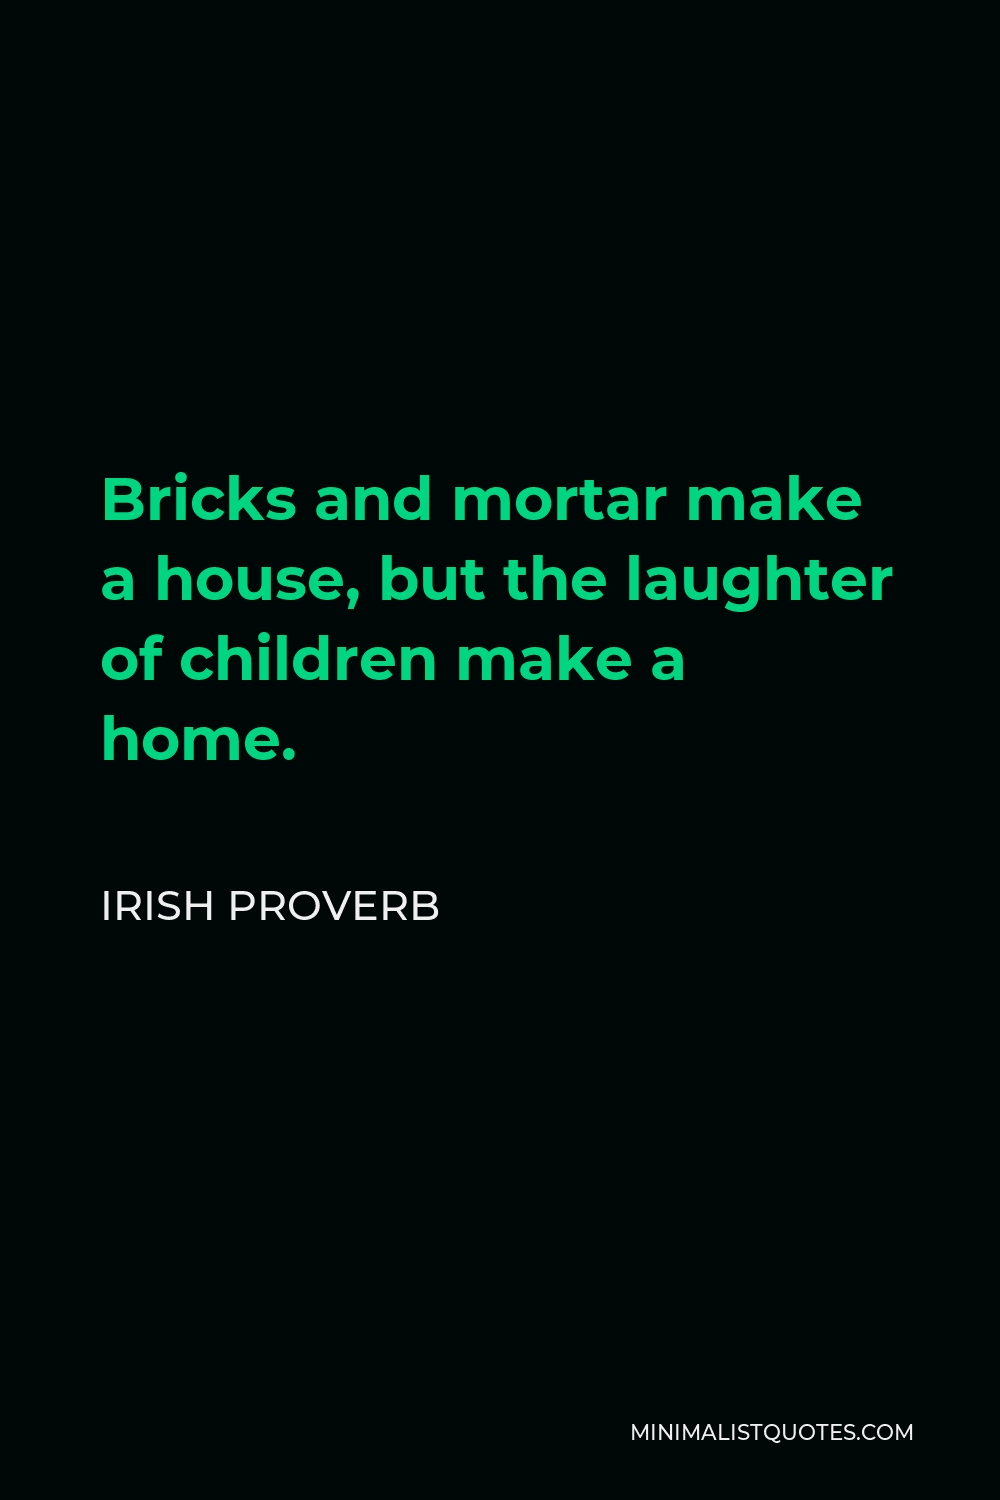 Irish Proverb Quote - Bricks and mortar make a house, but the laughter of children make a home.